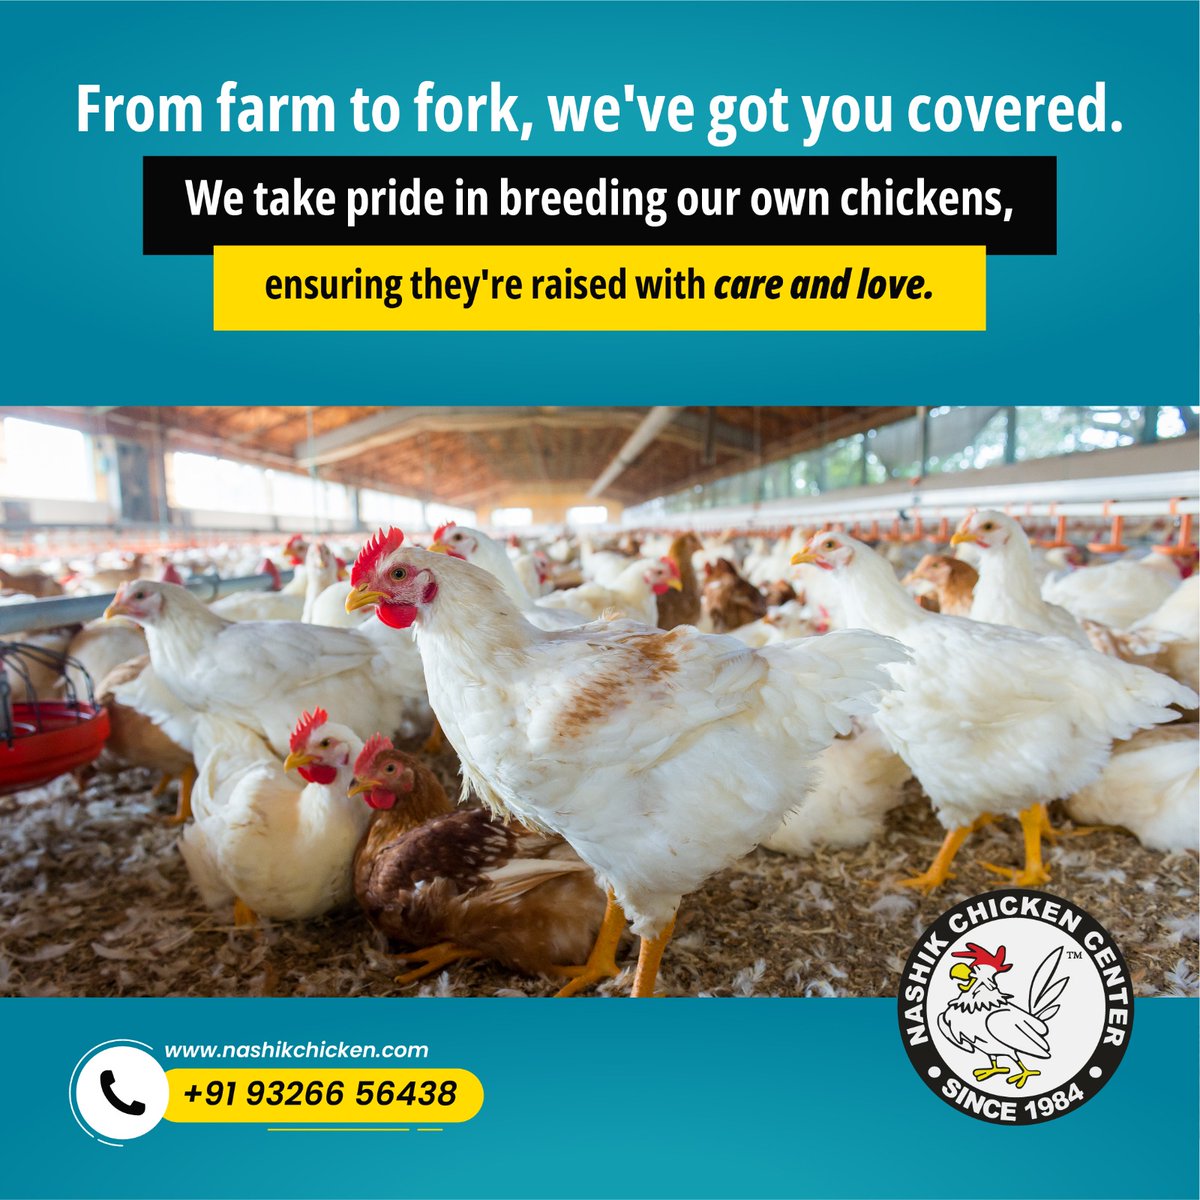 From Farm to Fork, a Journey of Care and Flavor! 🐔🍽️ 

#FarmToForkDelights #ChickensWithLove #PrideInBreeding #CarefullyRaised #FlavorfulFeasts #NashikChicken